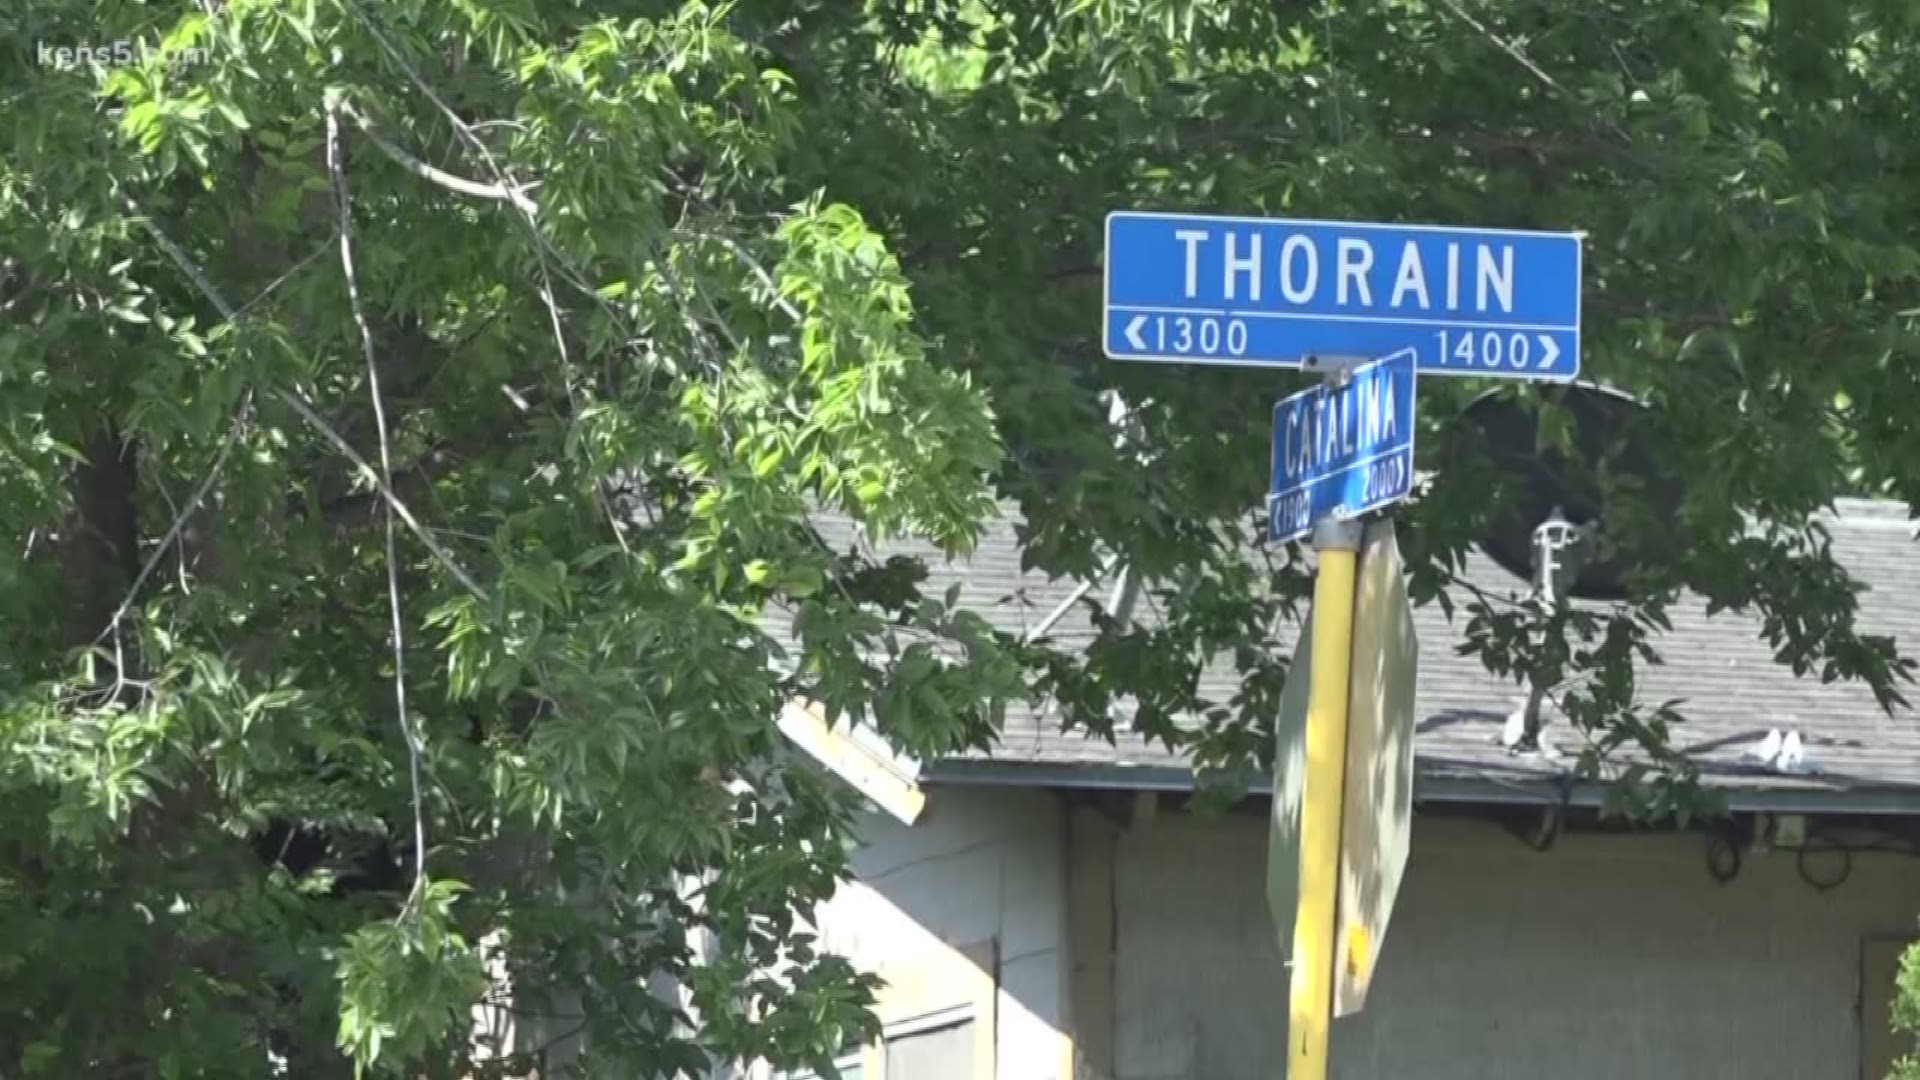 Police are investigating after two men were found dead near the railroad tracks off the 1300 block of Thorain.

Authorities said the deaths are suspicious.